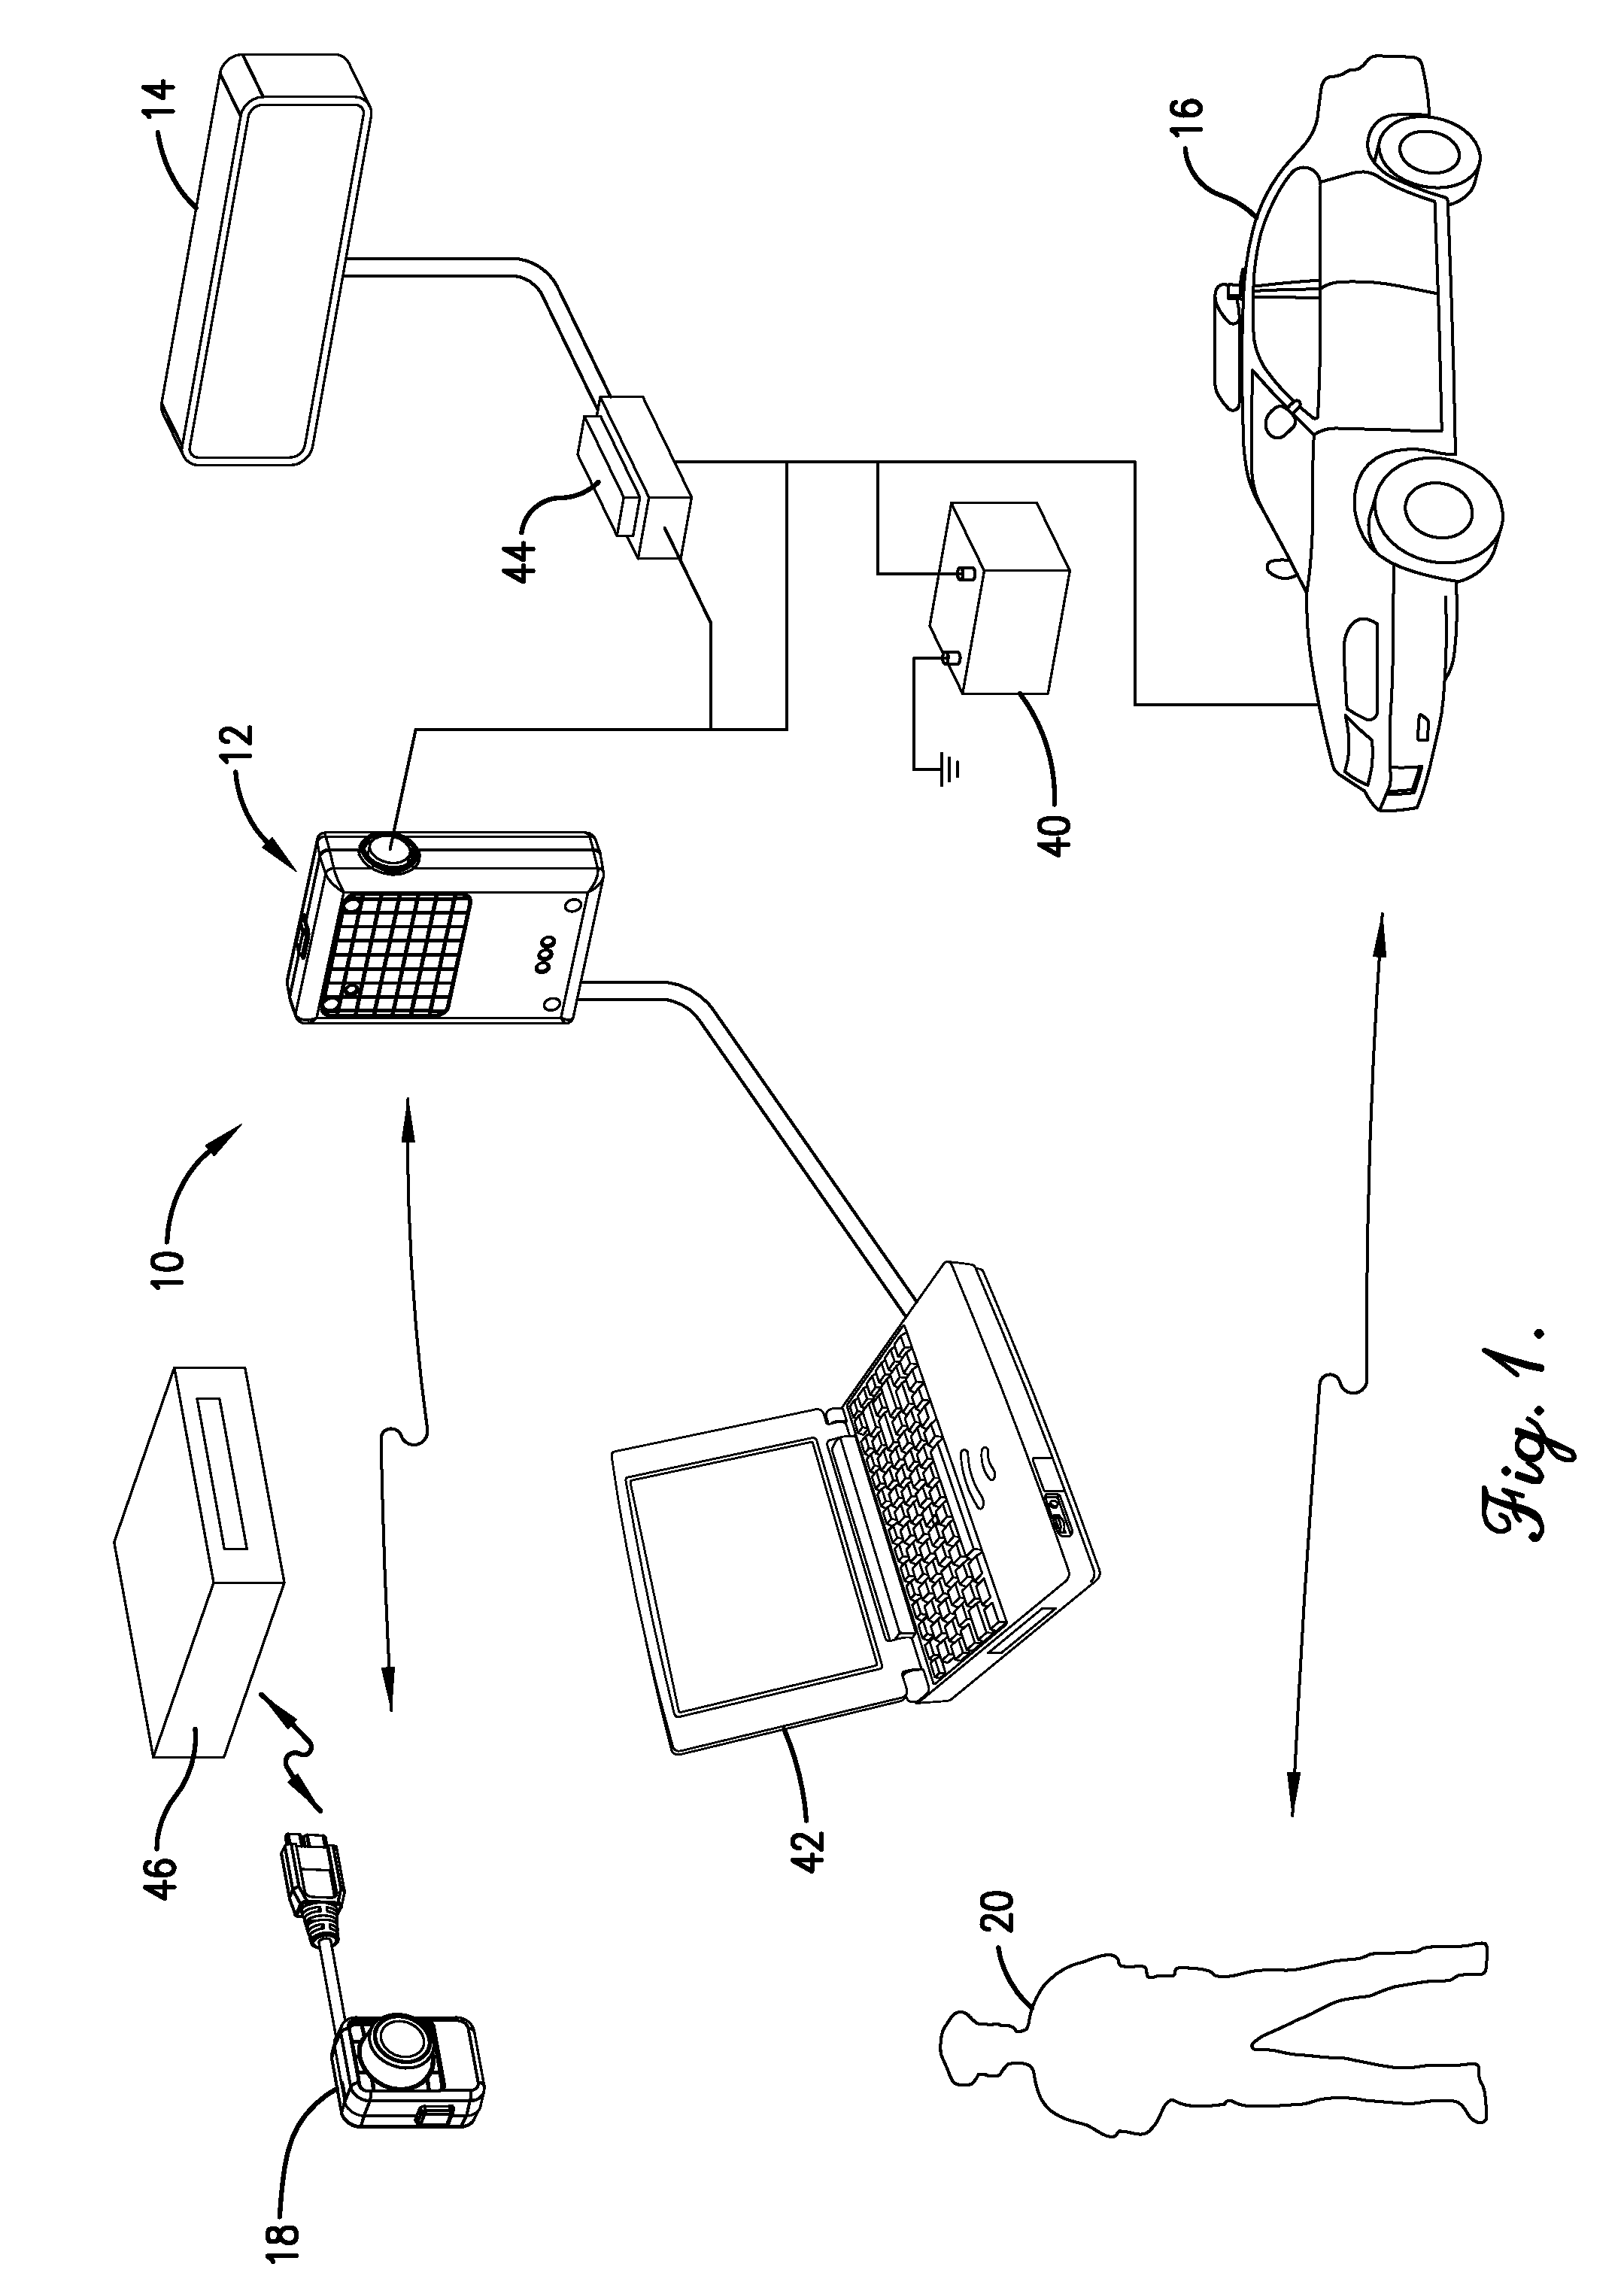 Computer program, method, and system for managing multiple data recording devices